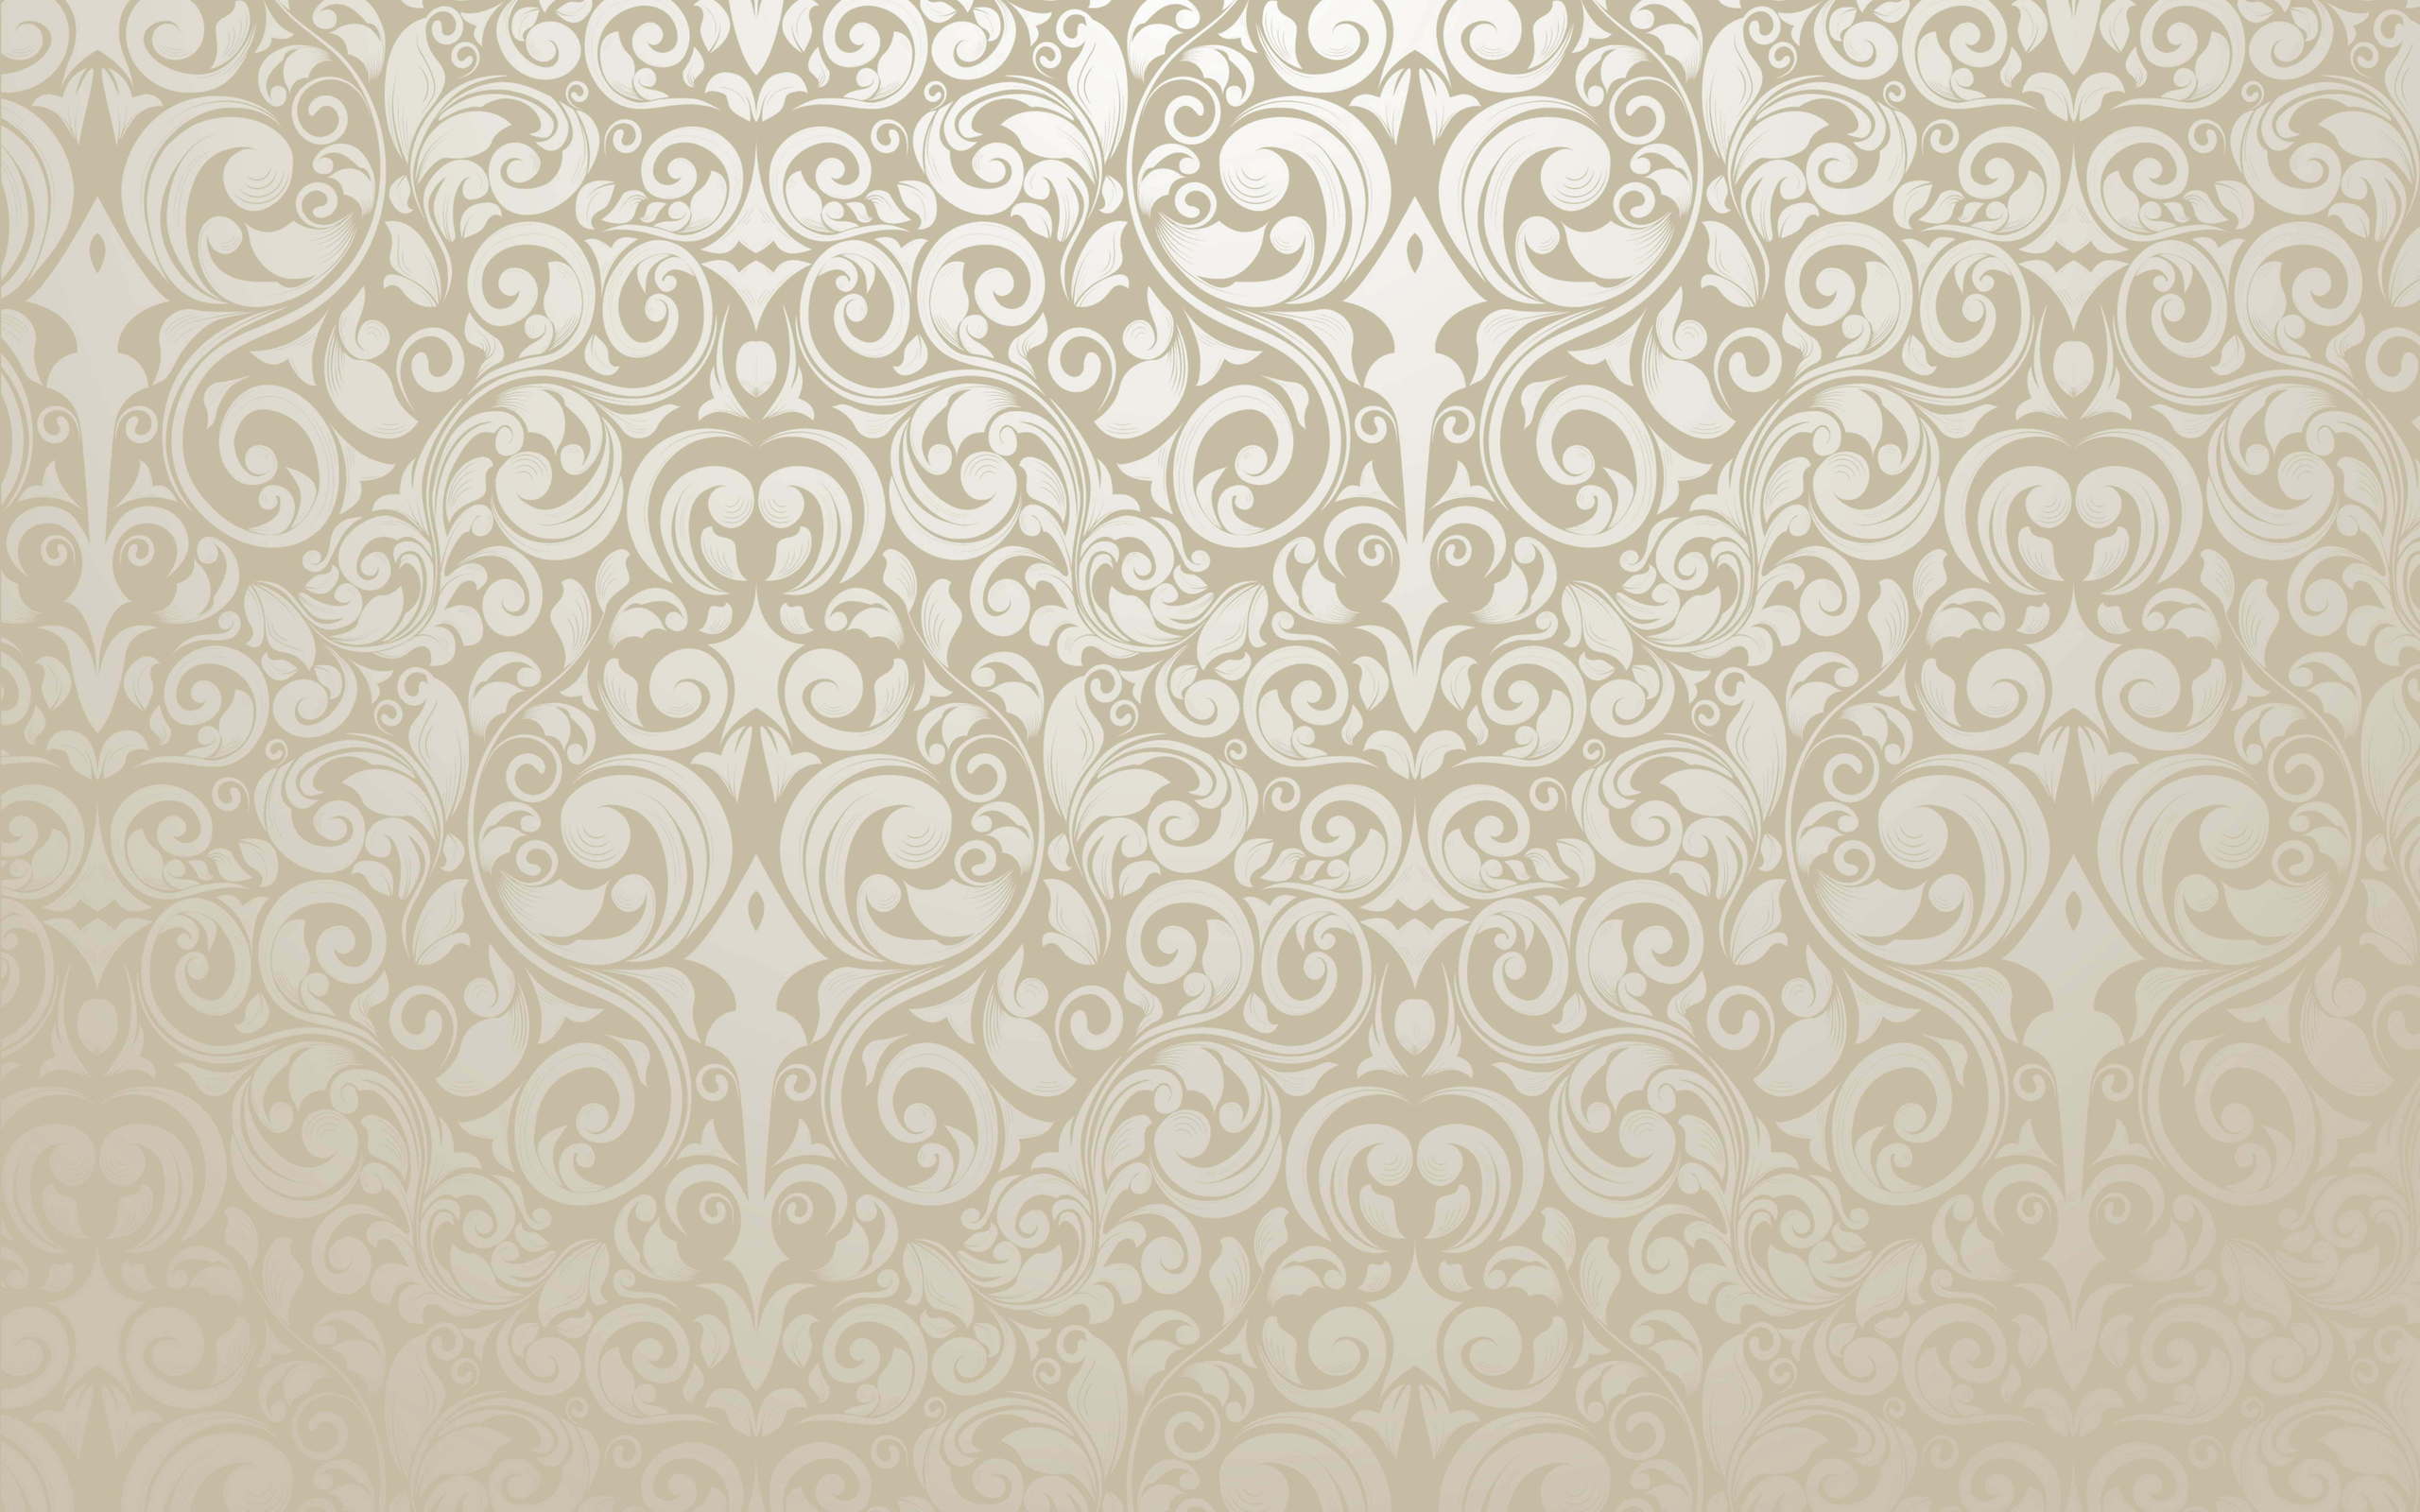  Pattern HD Wallpaper in gold color for card design HD Wallpapers for 2560x1600